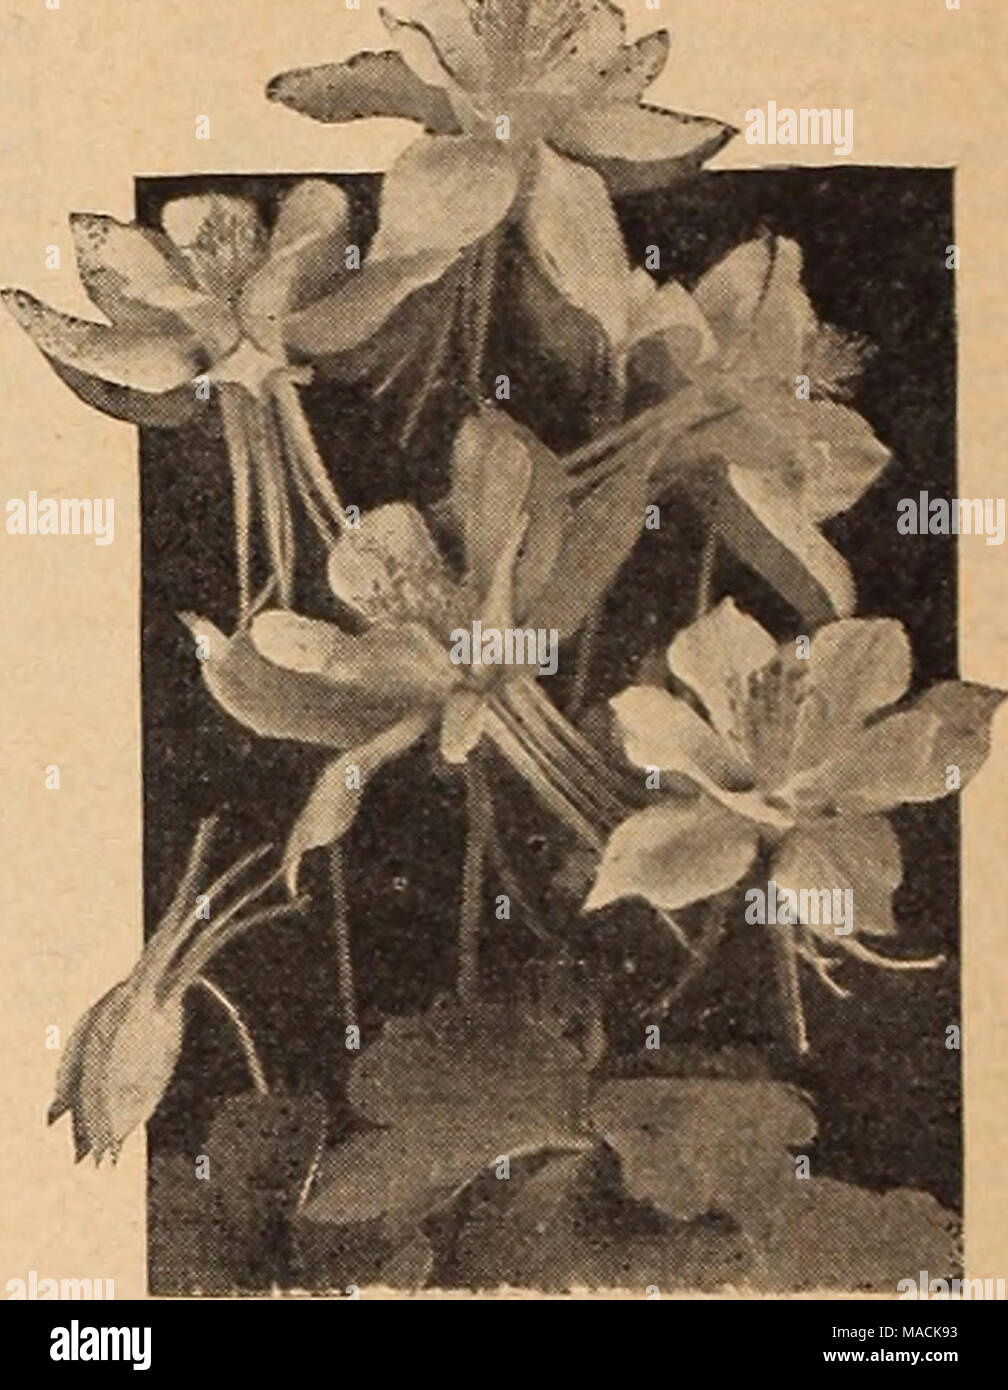 . Dreer's wholesale catalog for florists and market gardeners : 1942 winter spring summer . This duced. Aquilegia, Dreer's Long-Spurred Aquilegia—Columbine Dreer's Long-Spurred Columbines strain is unquestionably the finest yet The plants are of strong thrifty growth flowers of largest size, varying in color through of cream, pink, lavender, blue, white, red, etc. Trade pkt. Chrysantha (Golden Spurred). Golden yellow. 3-4 ft $0 40 Copper Queen. Copper red with straw yellow corolla. 2 Yz ft Crimson Star. Rich crimson outer petals and pure white center. 1% ft. tall. Y&amp; oz. $1.50; Yi oz. $2.5 Stock Photo